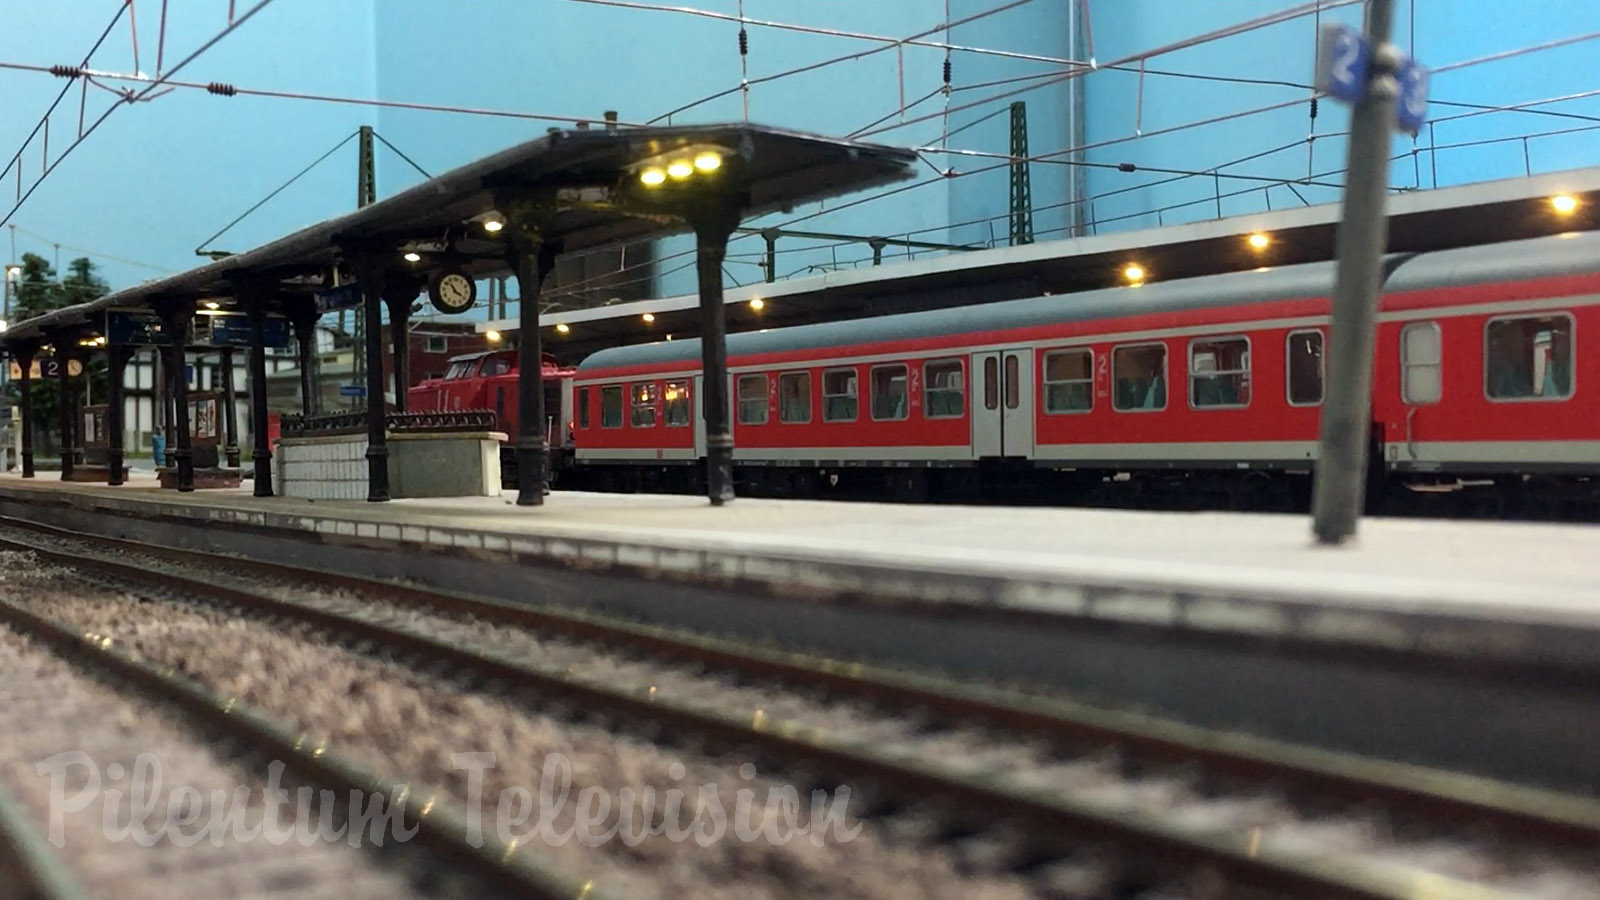 Model trains and model railroad layout of the national railway company of Germany in HO scale